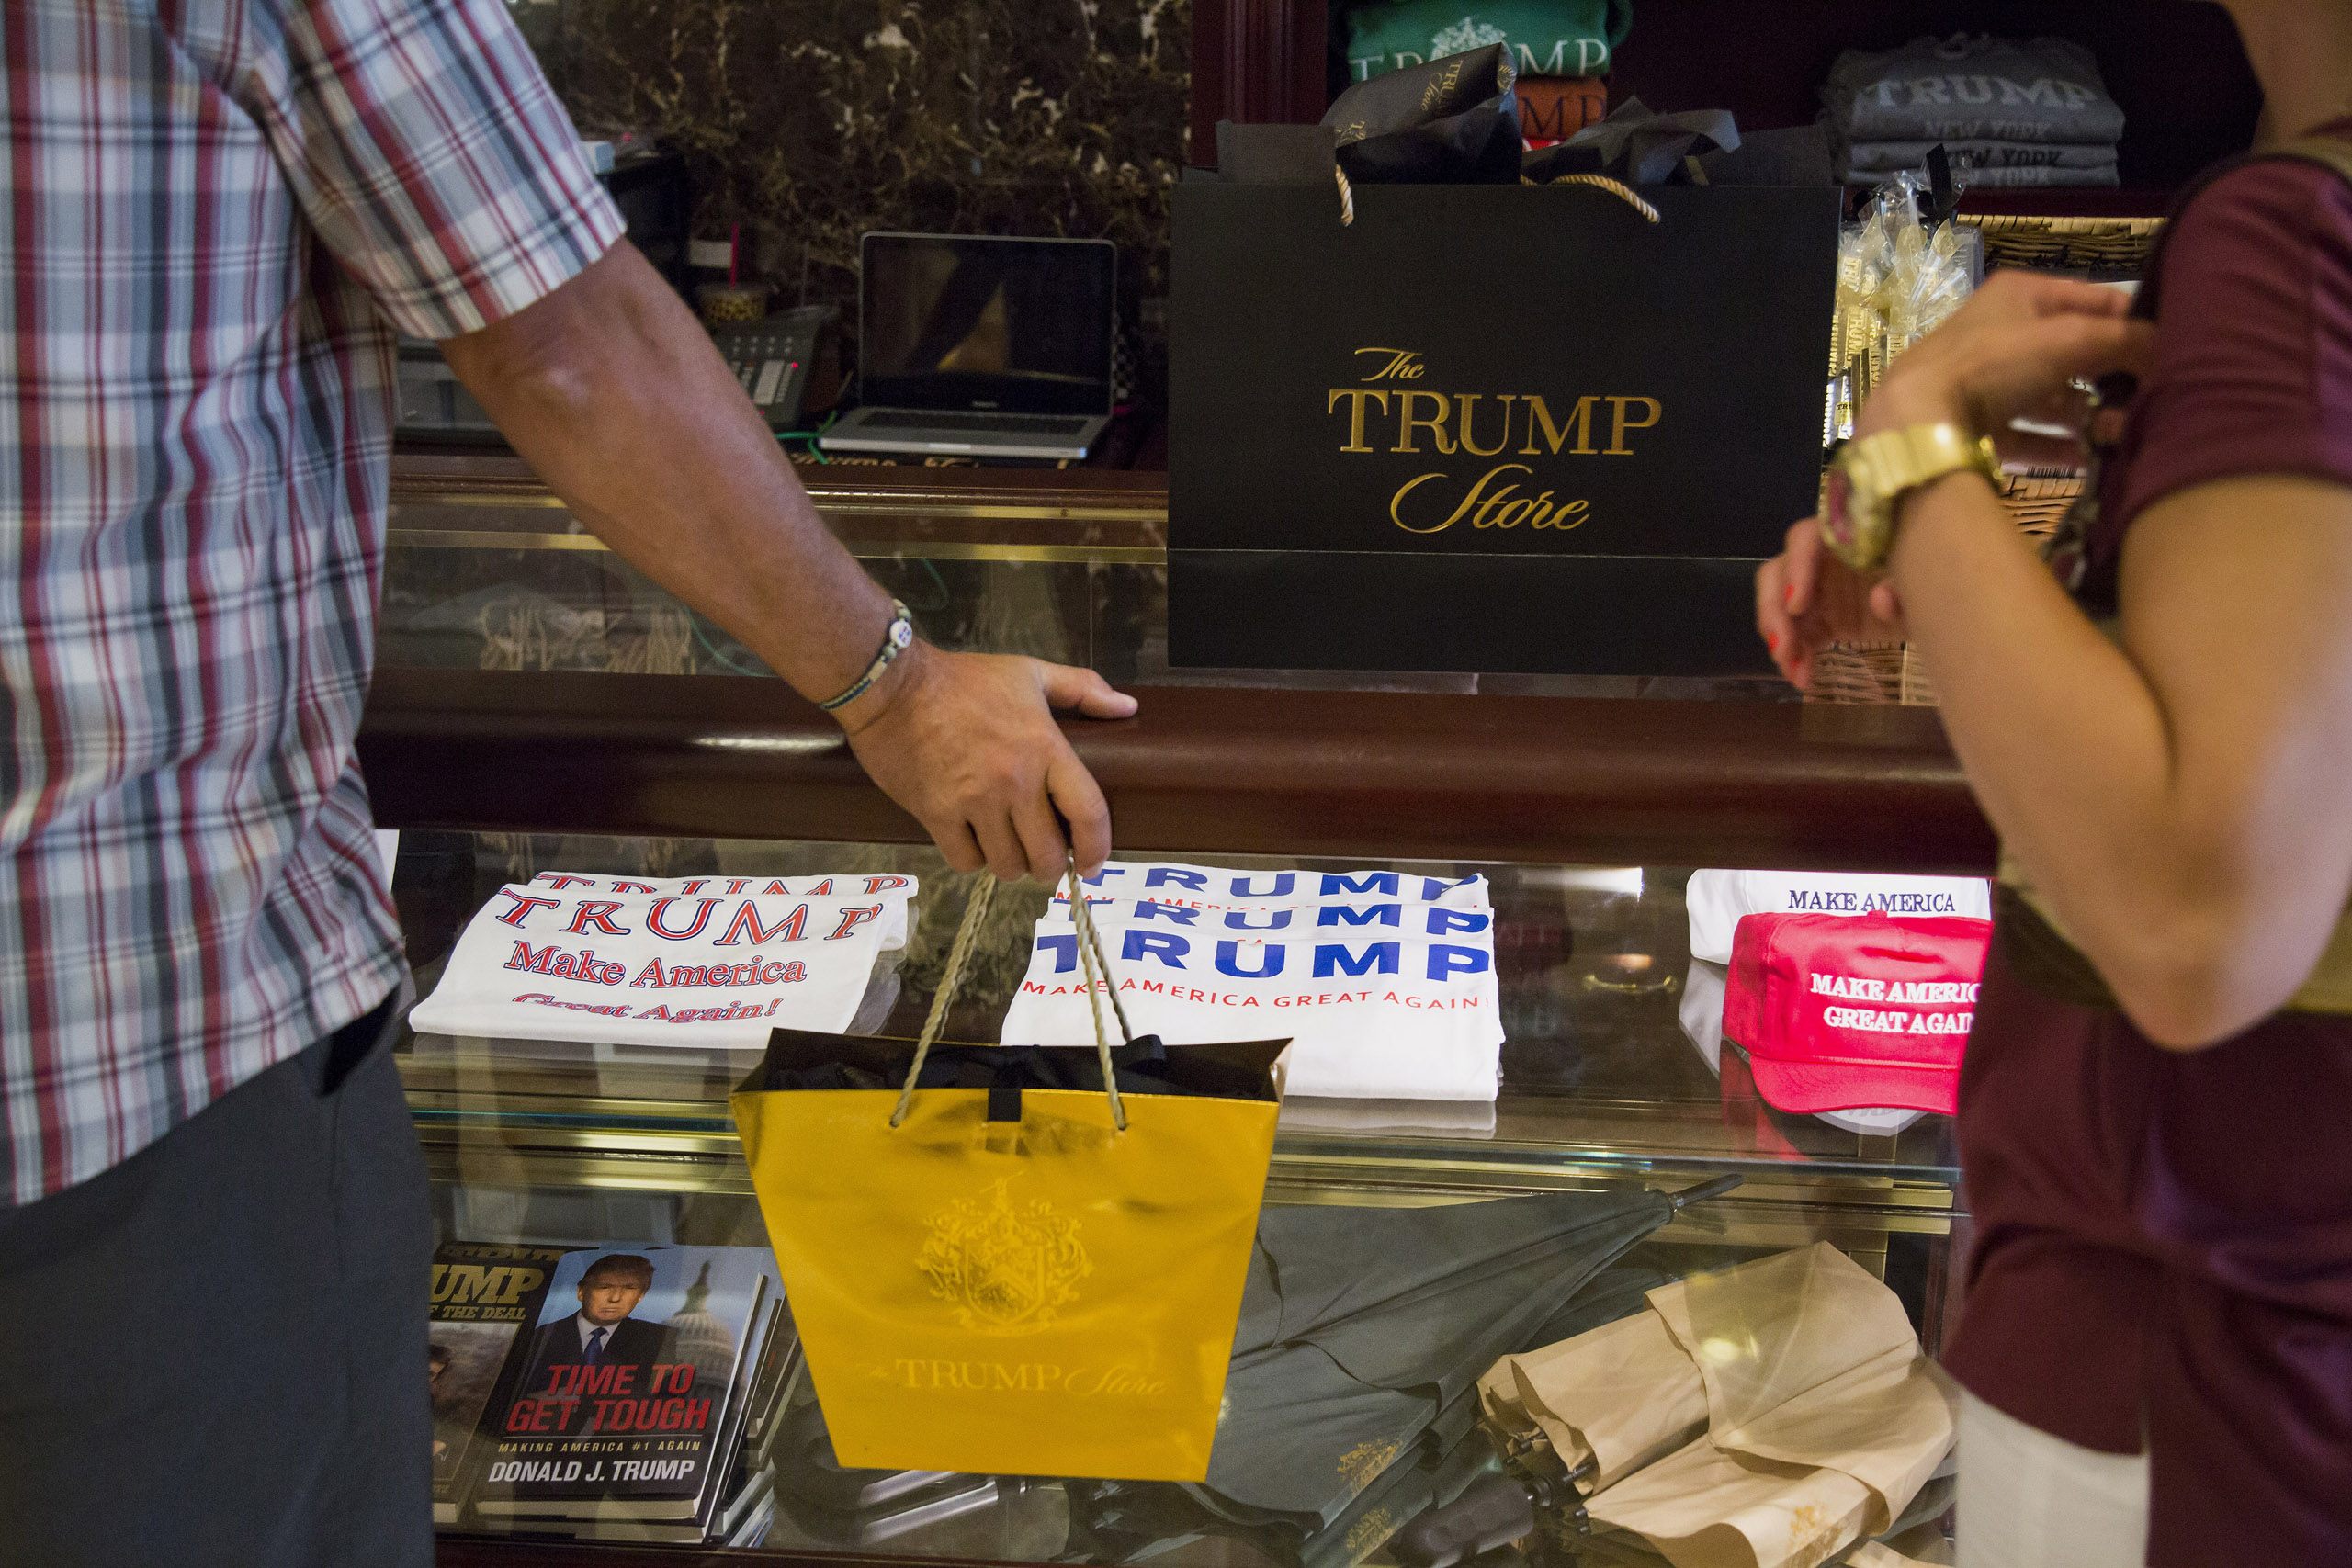 Shoppers purchase merchandise supporting Donald Trump, president and chief executive of Trump Organization Inc. and 2016 Republican presidential candidate, inside a store at Trump Tower in New York City on Aug. 26, 2015. (Bloomberg/Getty Images)